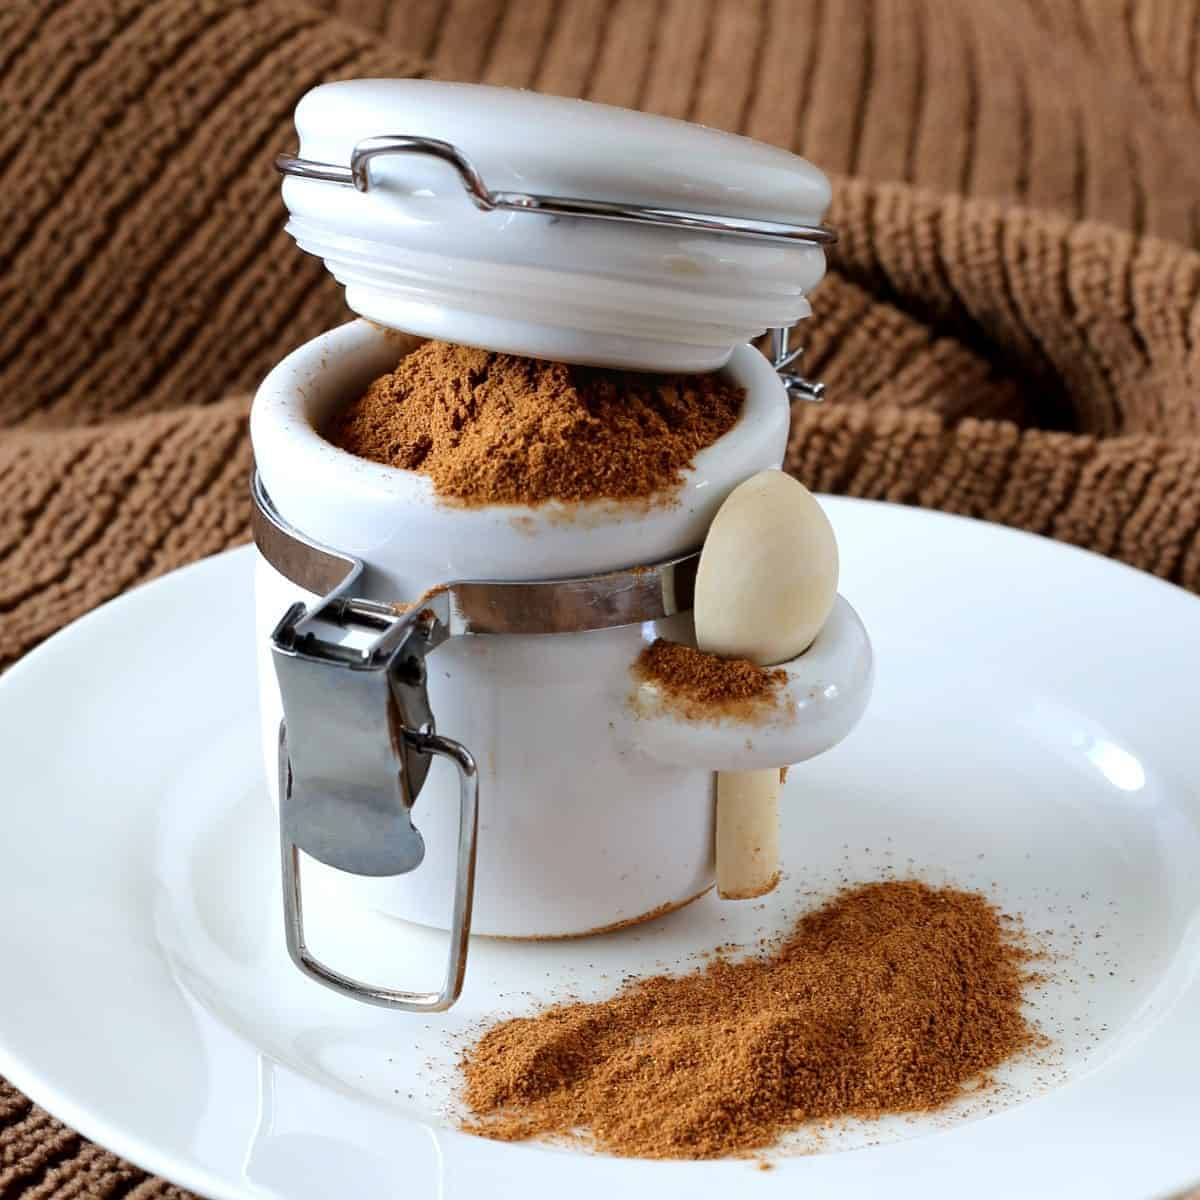 Small white jar with a hooked spoon and pumpkin seasoning blend is overflowing.